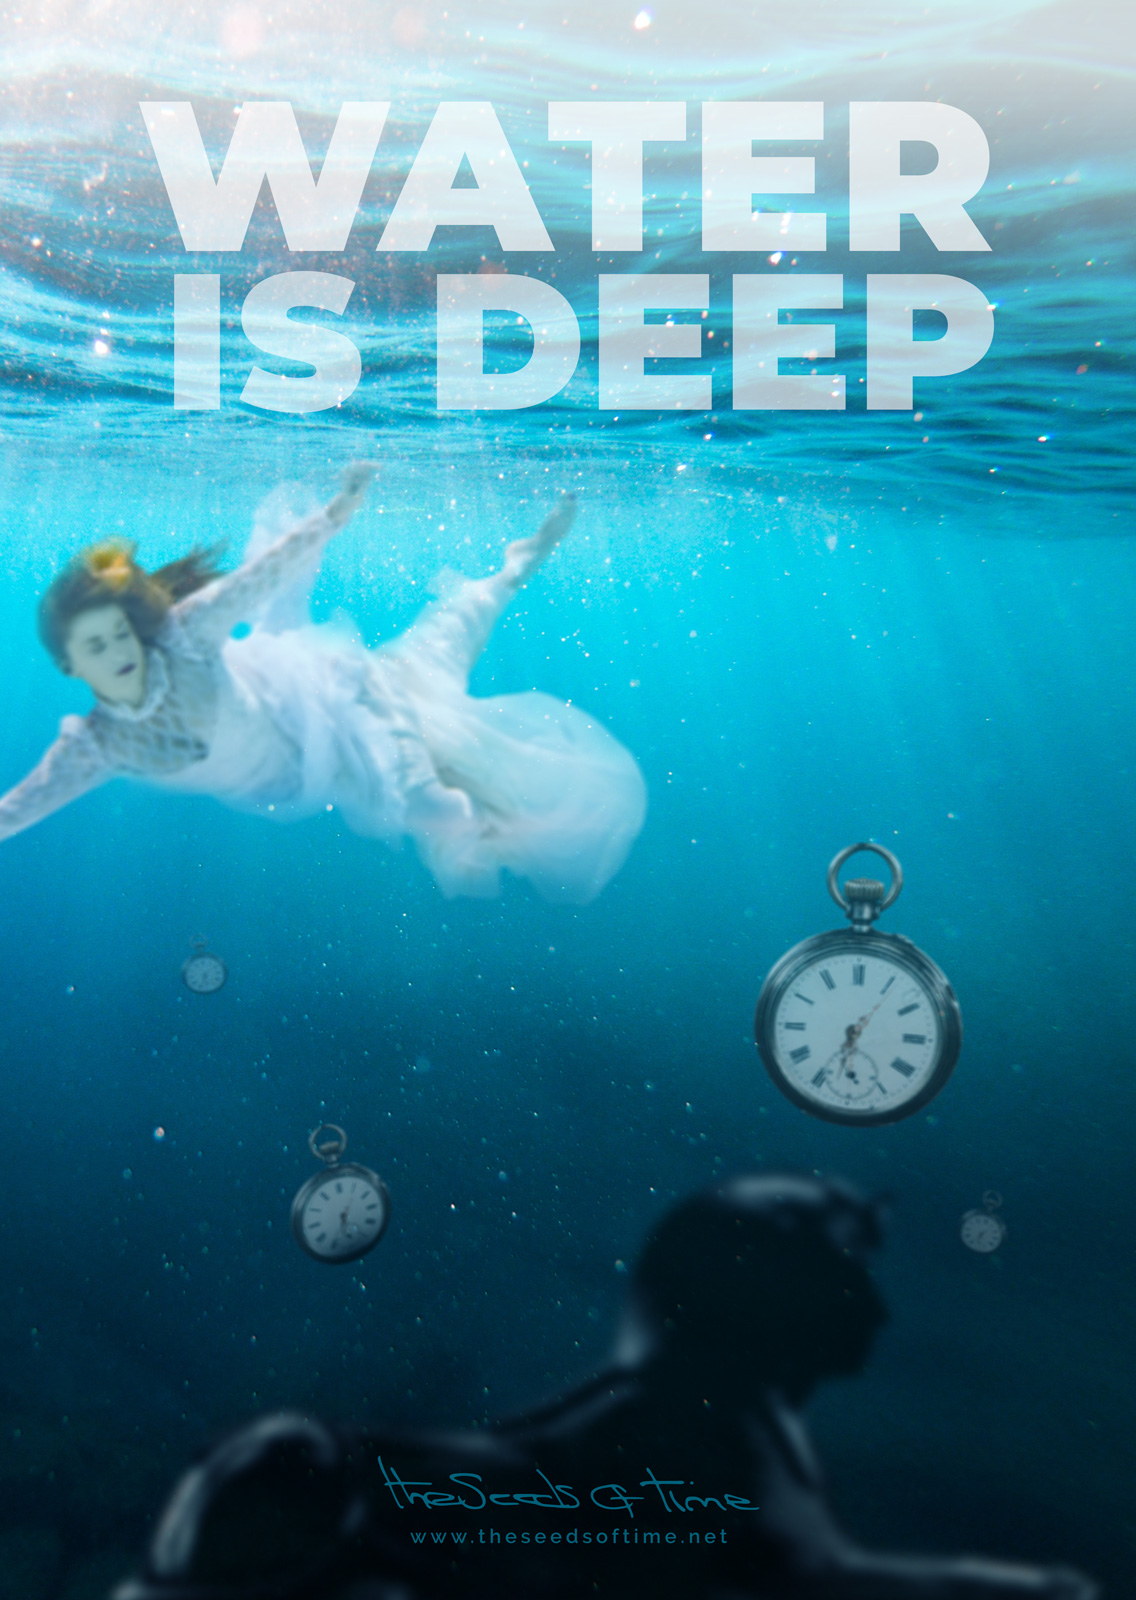 Poster art for song 'Water is deep' from album titled Spirit by The Seeds of Time on which there are shown sinking clocks alongside with a woman in a flowing dress floating near the surface and a dark shape of a sphinx in the depths of the ocean